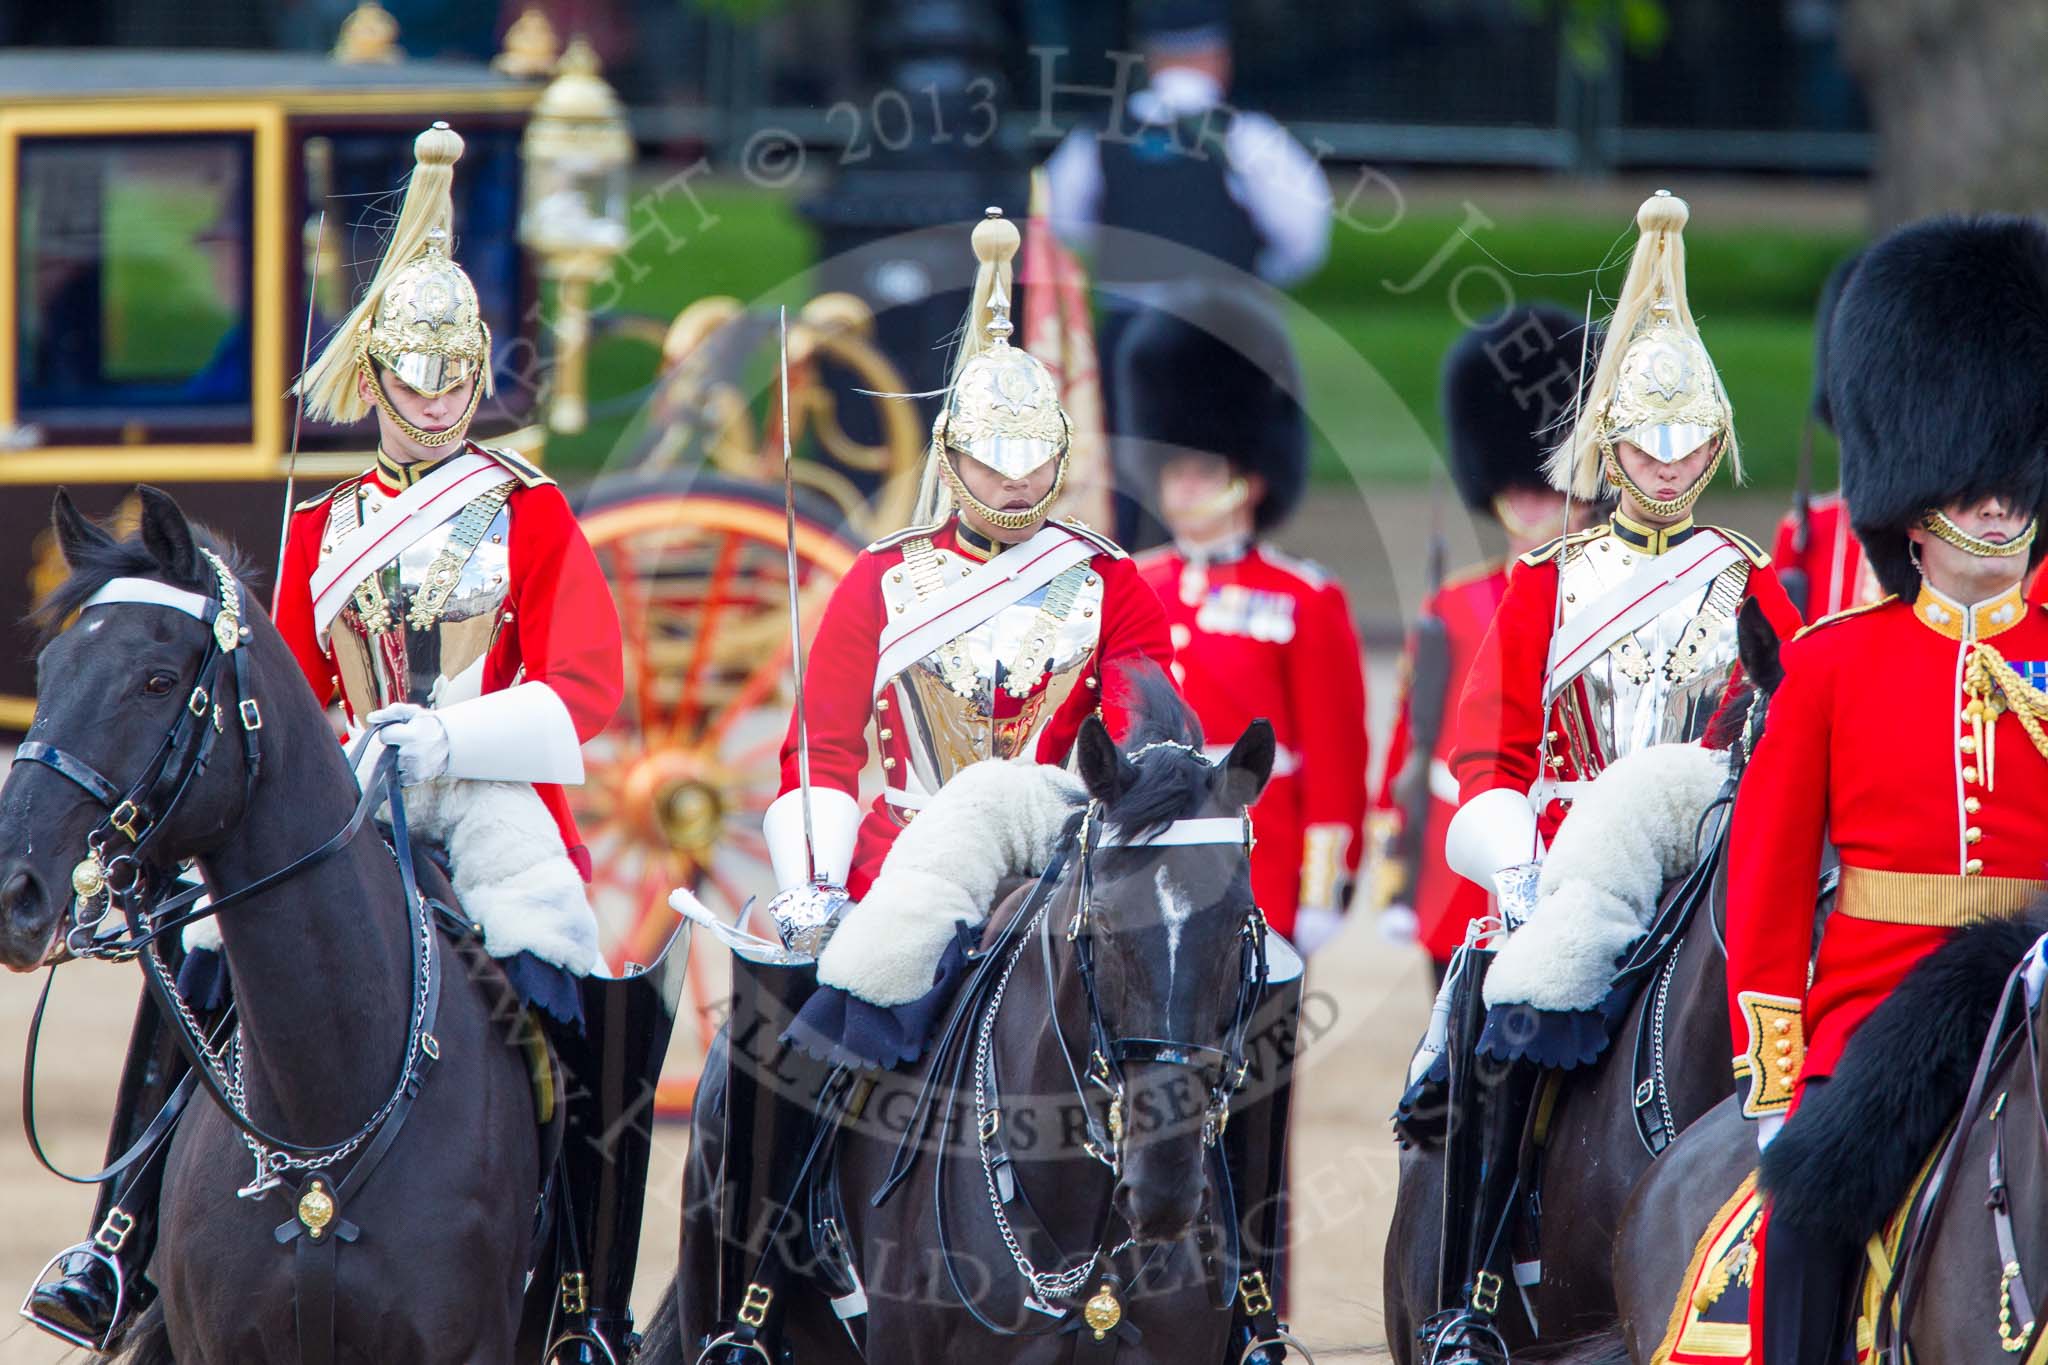 Trooping the Colour 2013: The Brigade Major Household Division Lieutenant Colonel Simon Soskin, Grenadier Guards, followed by the four Troopers of The Life Guard, after the Inspection of the Line. Image #352, 15 June 2013 11:06 Horse Guards Parade, London, UK